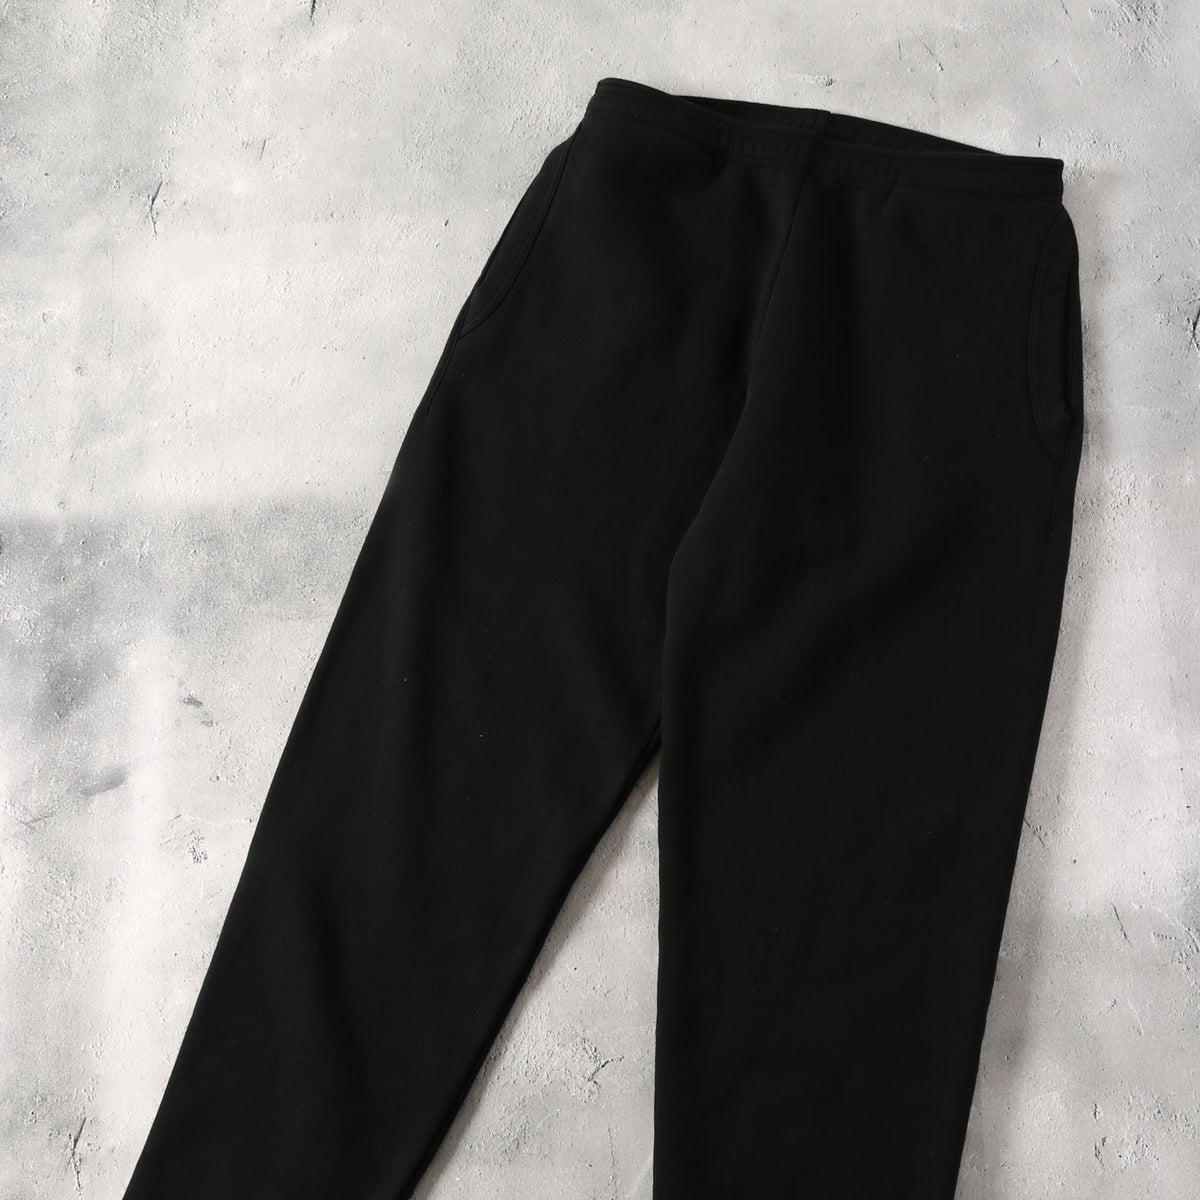 Limited color on BARNS OUTFITTERS official COZUN BR-3049 Sweat – Pants website】 the